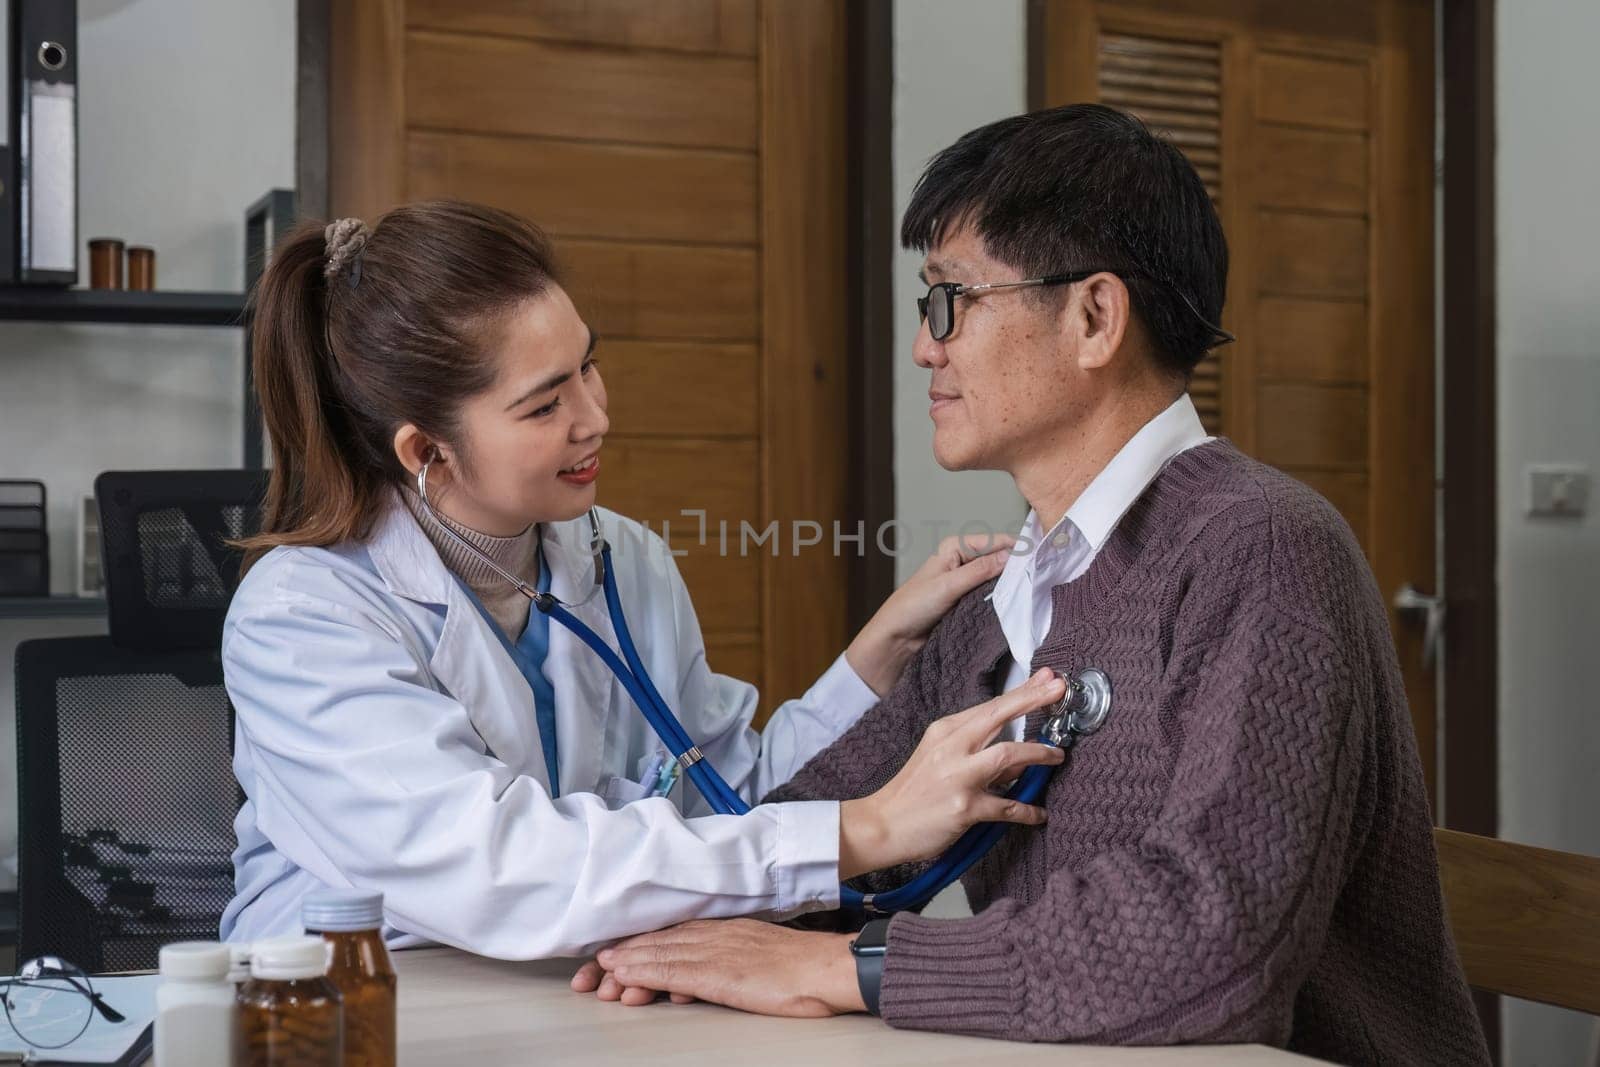 The female doctor in charge holds a stethoscope and listens to the patient. Doctor checking heartbeat examining retired elderly man at home Senior heart disease, health checkup concept health care.